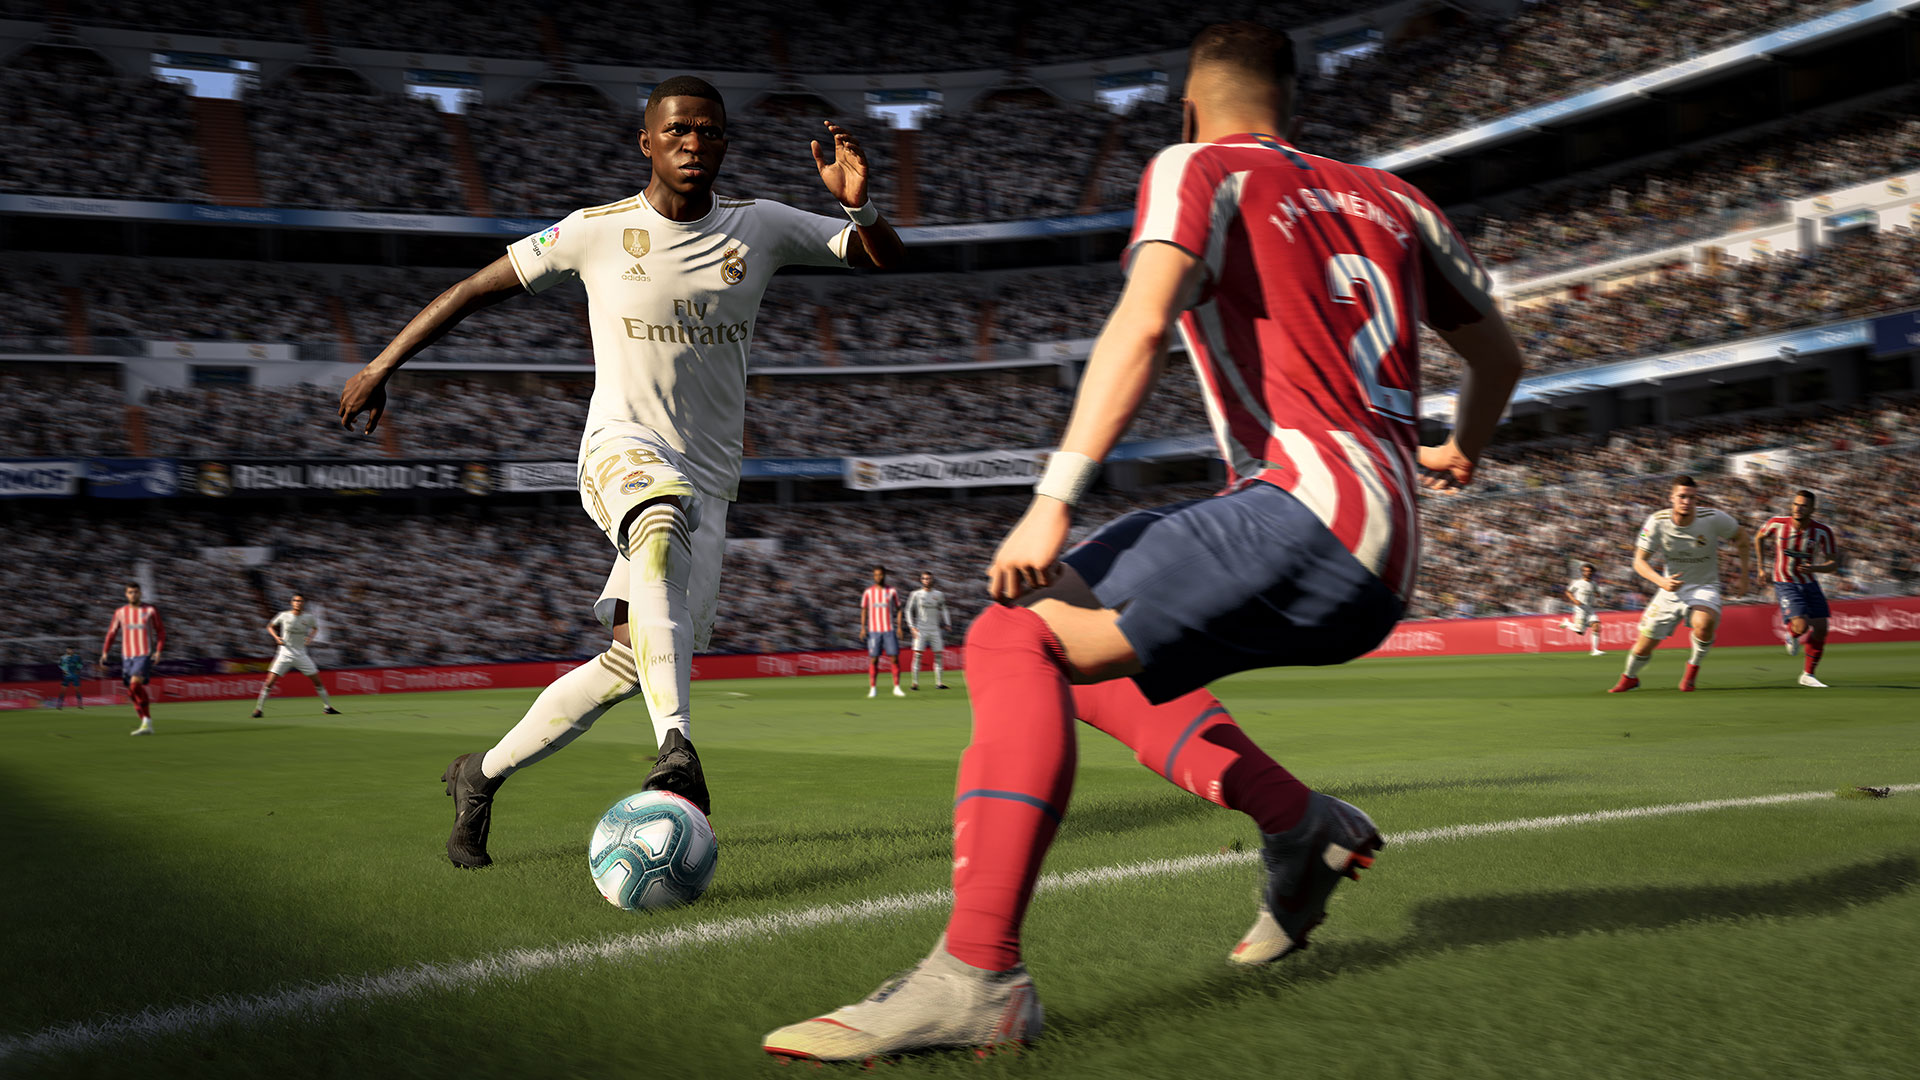 fifa 20 playstation store price